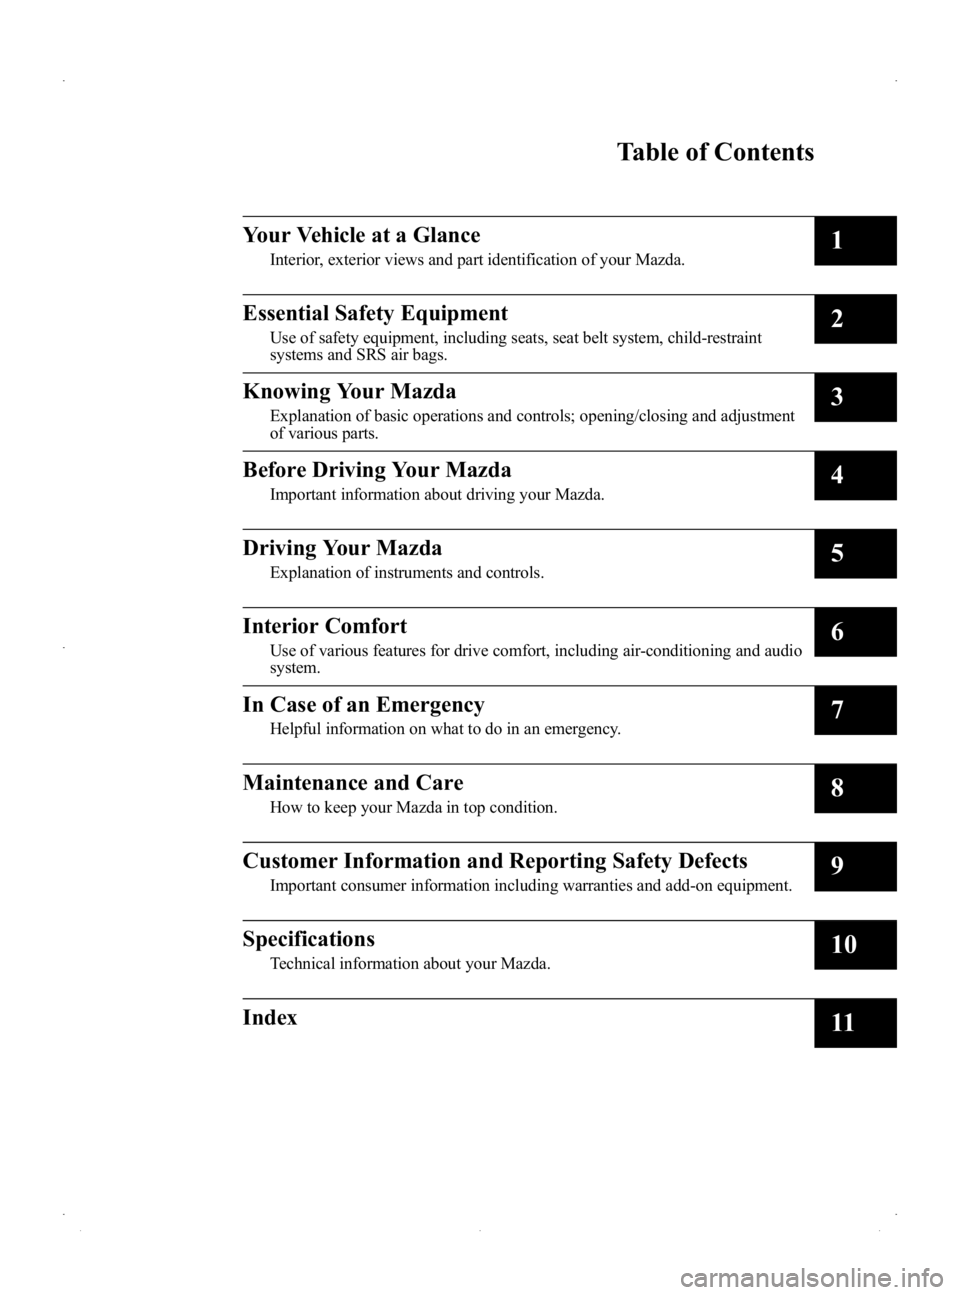 MAZDA MODEL 2 2014  Owners Manual Black plate (5,1)
Mazda2_8DB2-EA-13G_Edition4 Page5
Thursday, May 15 2014 1:37 PM
Form No.8DB2-EA-13G
Table of Contents
Your Vehicle at a Glance
Interior, exterior views and part identification of you